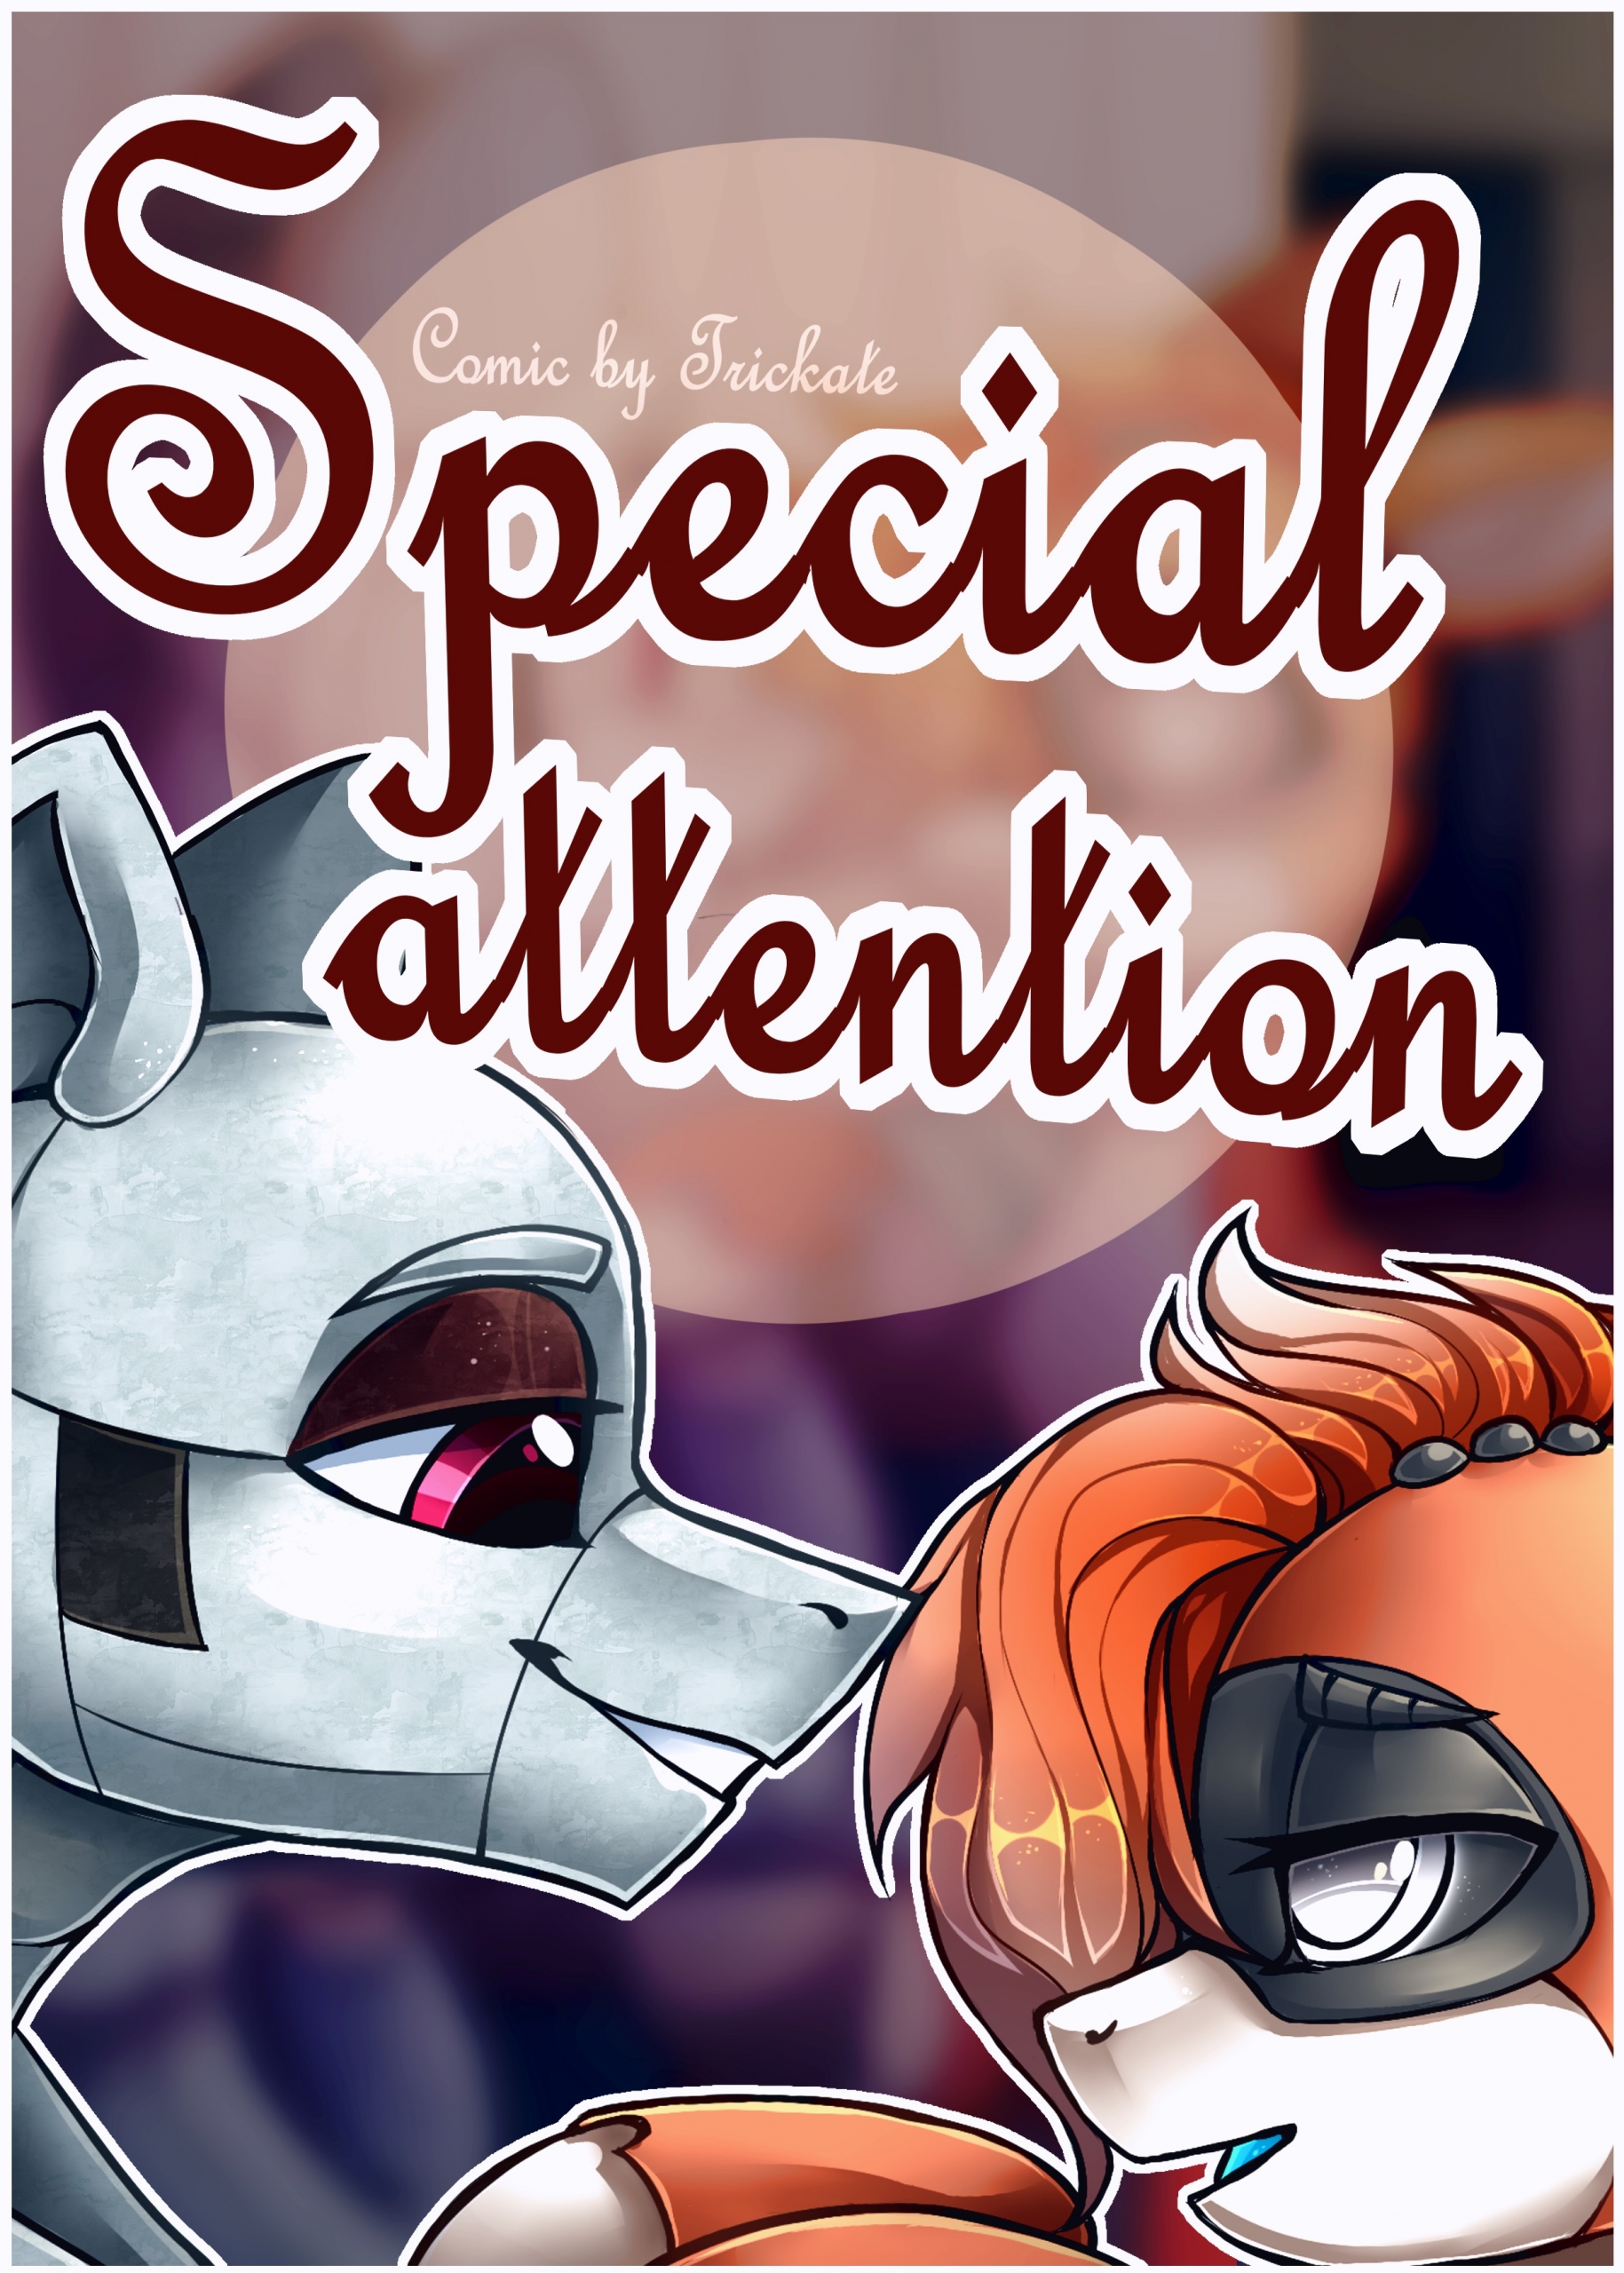 Special Attention porn comic page 01 on category My Little Pony